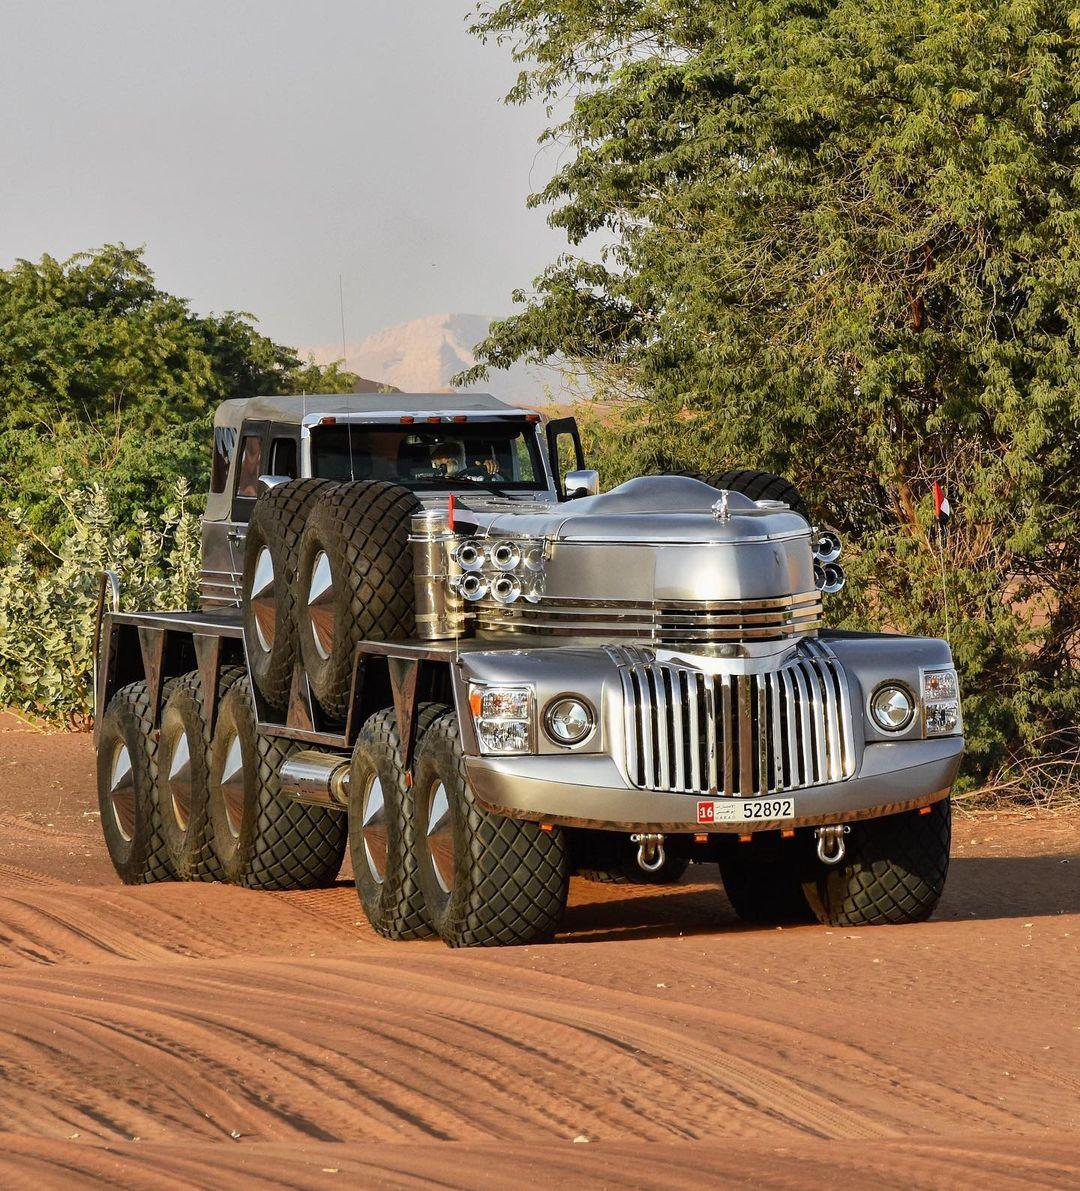 Abu Dhabi's billionaire sheik owns the world's craziest and largest SUV